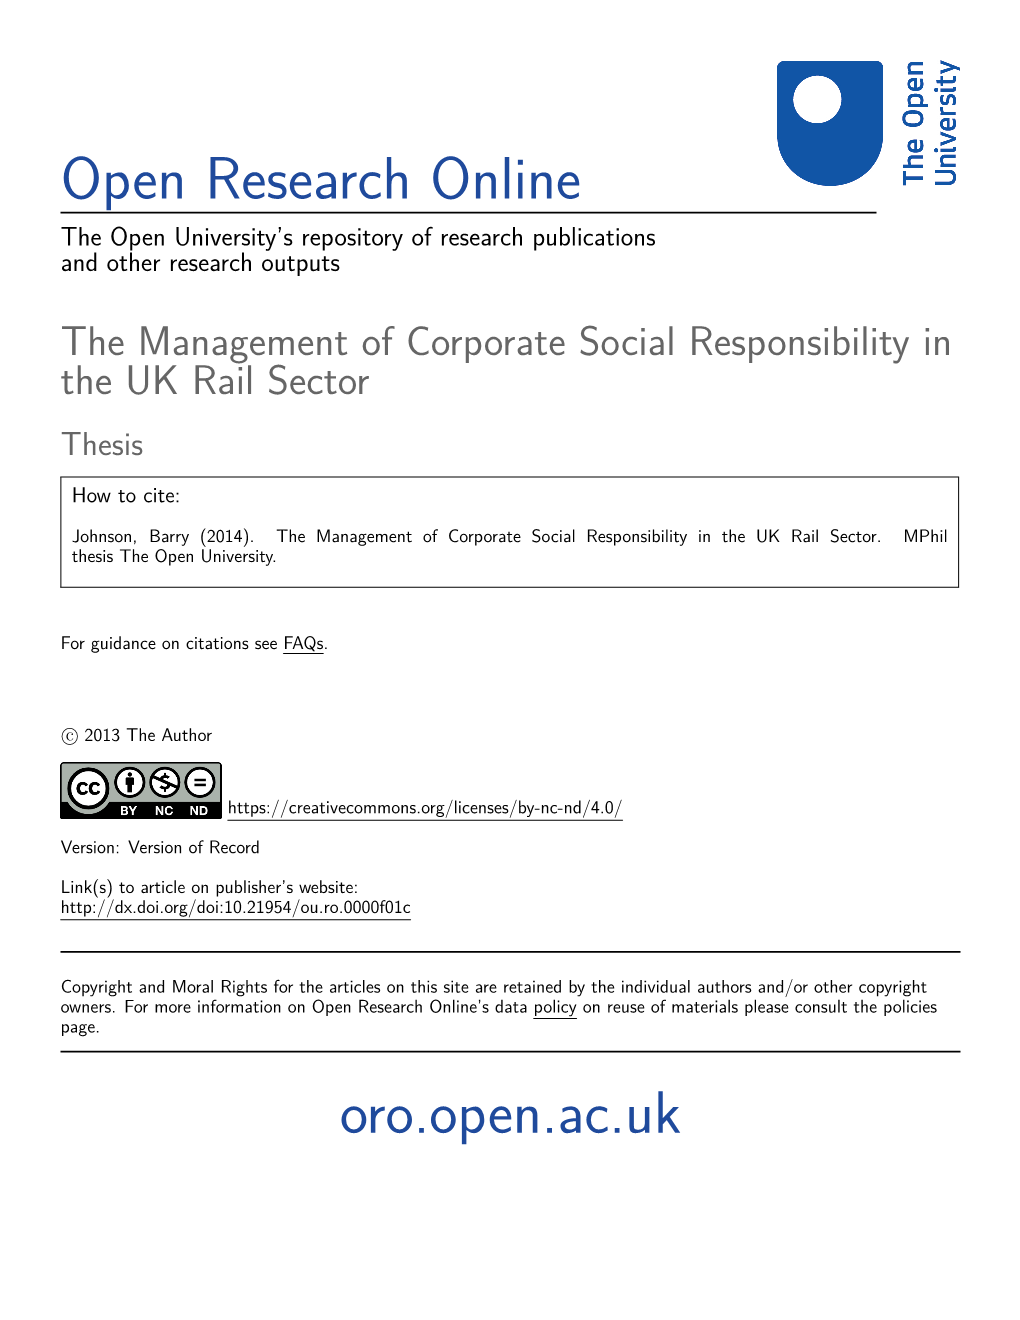 The Management of Corporate Social Responsibility in the UK Rail Sector Thesis